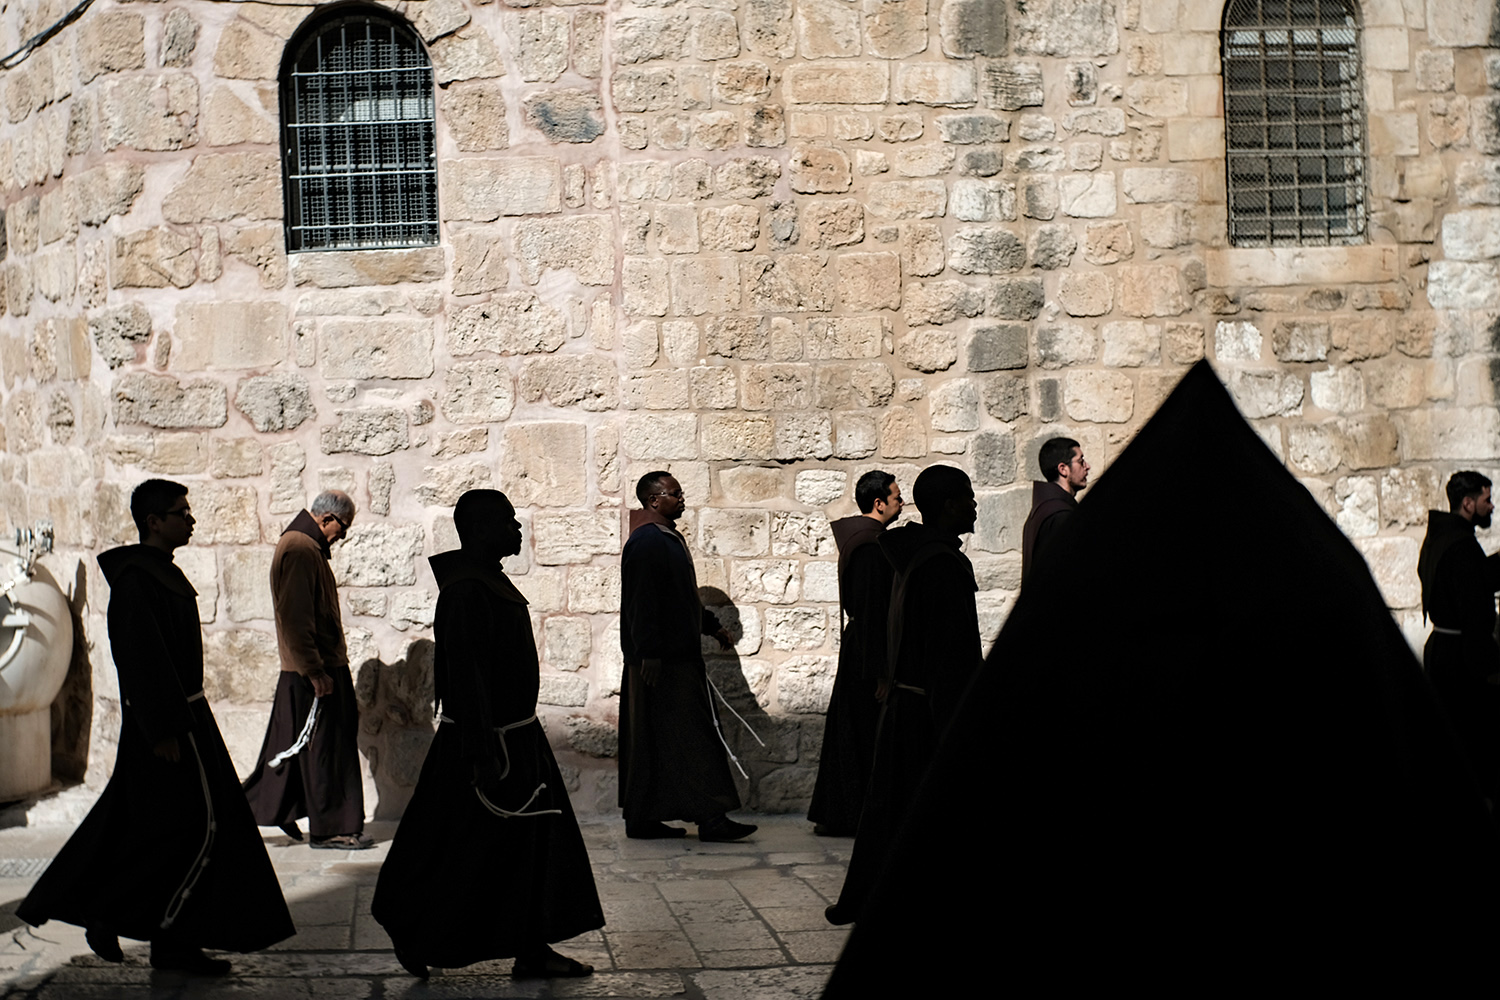  Priests arrive for Mass at the Church of the Holy Sepulchre in Jerusalem. 